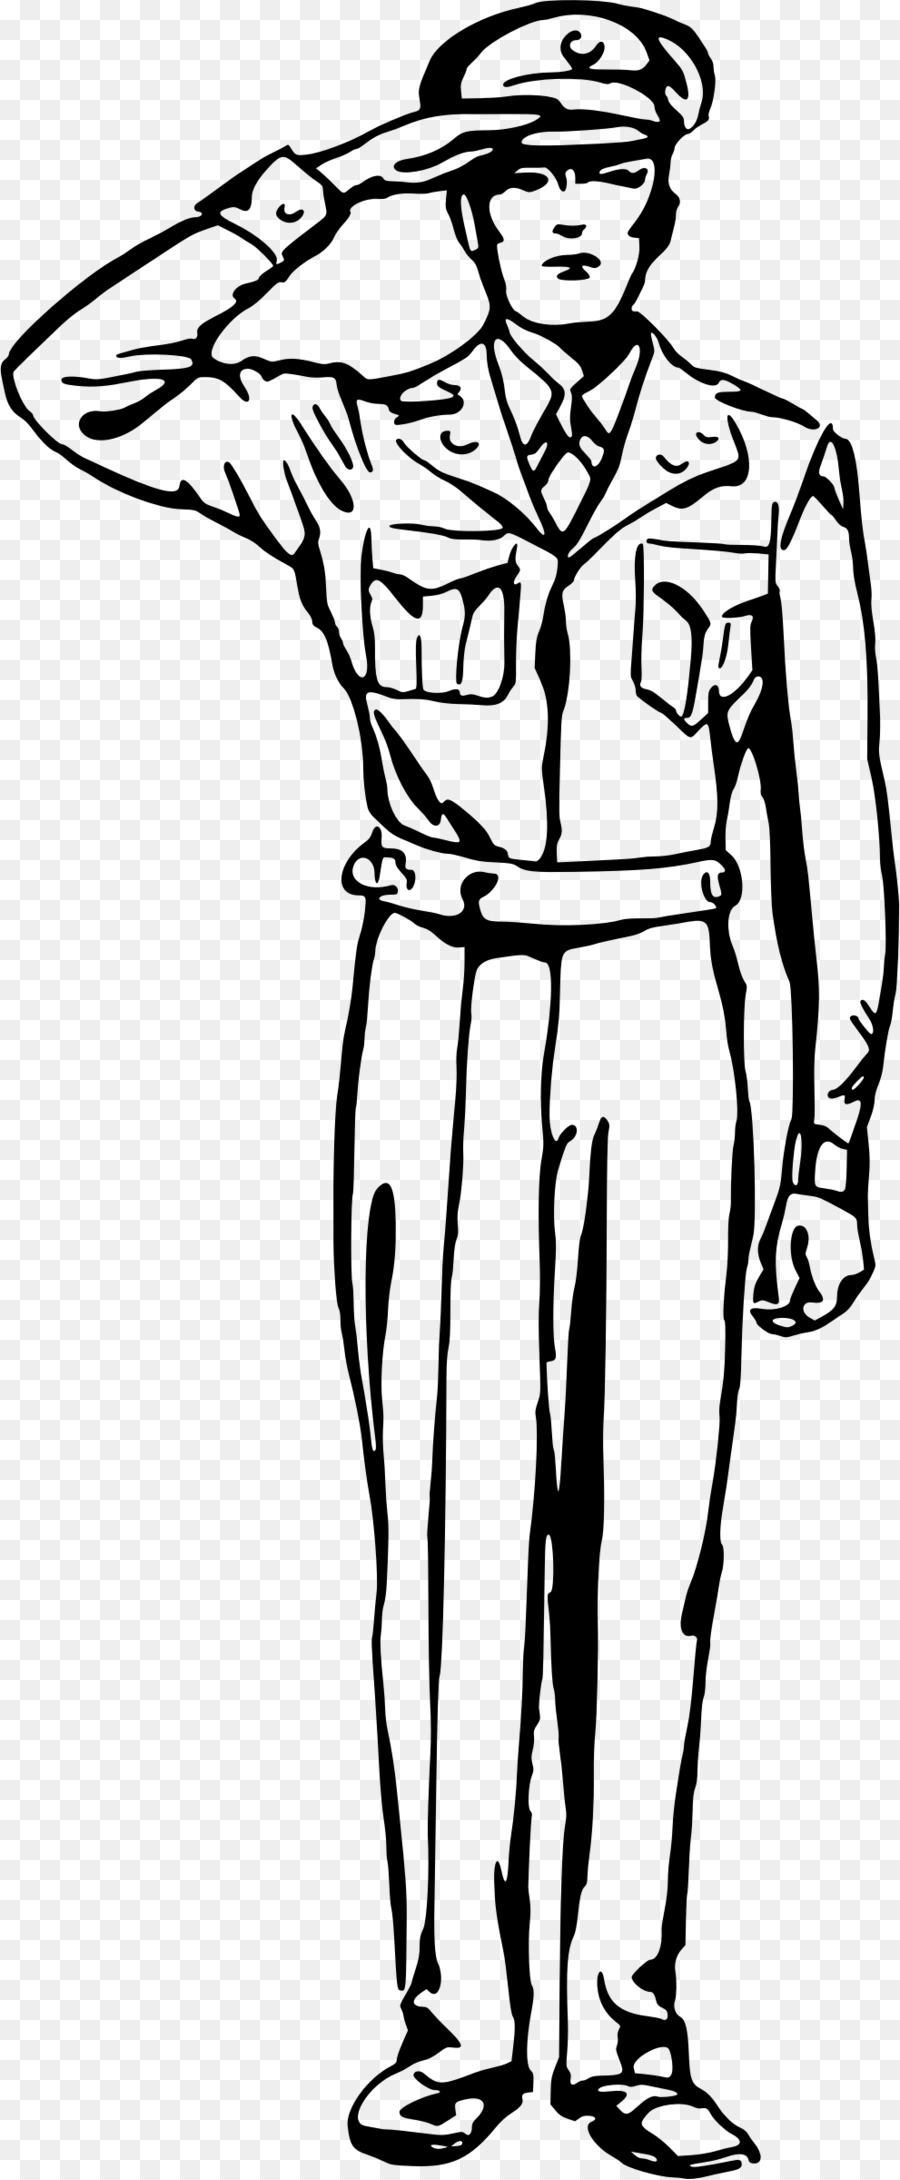 Line art Soldier Salute Drawing - Soldier png download - 991*2399 - Free Transparent Line Art png Download.